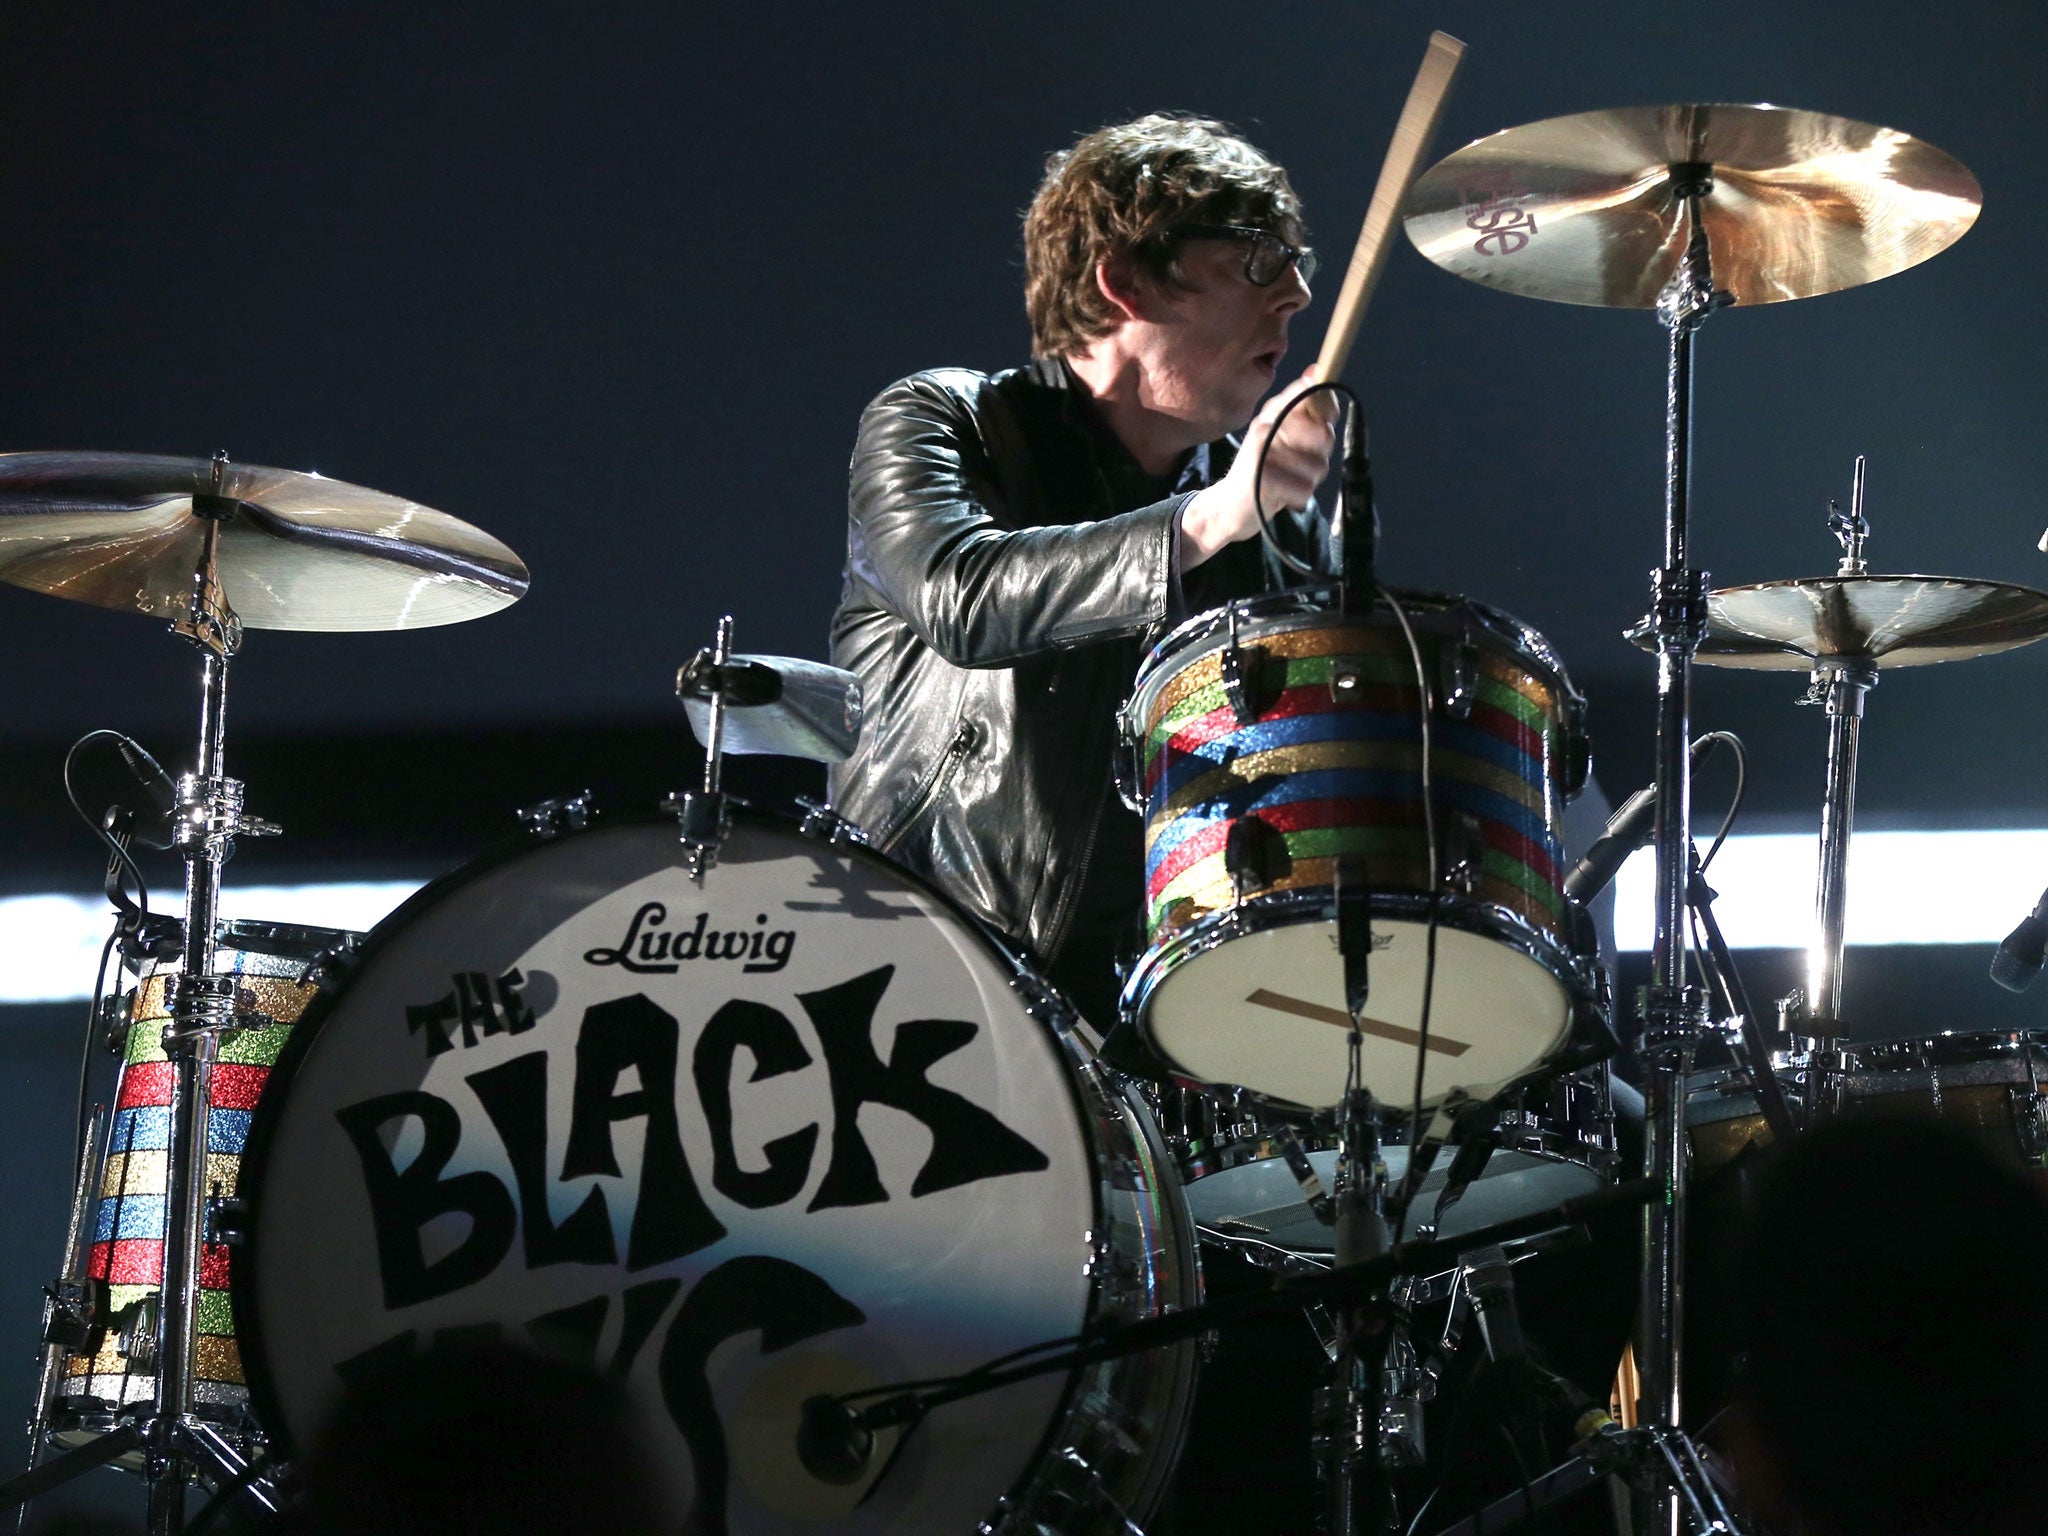 The Black Keys drummer Patrick Carney has shoulder injury and has been forced to cancel gigs